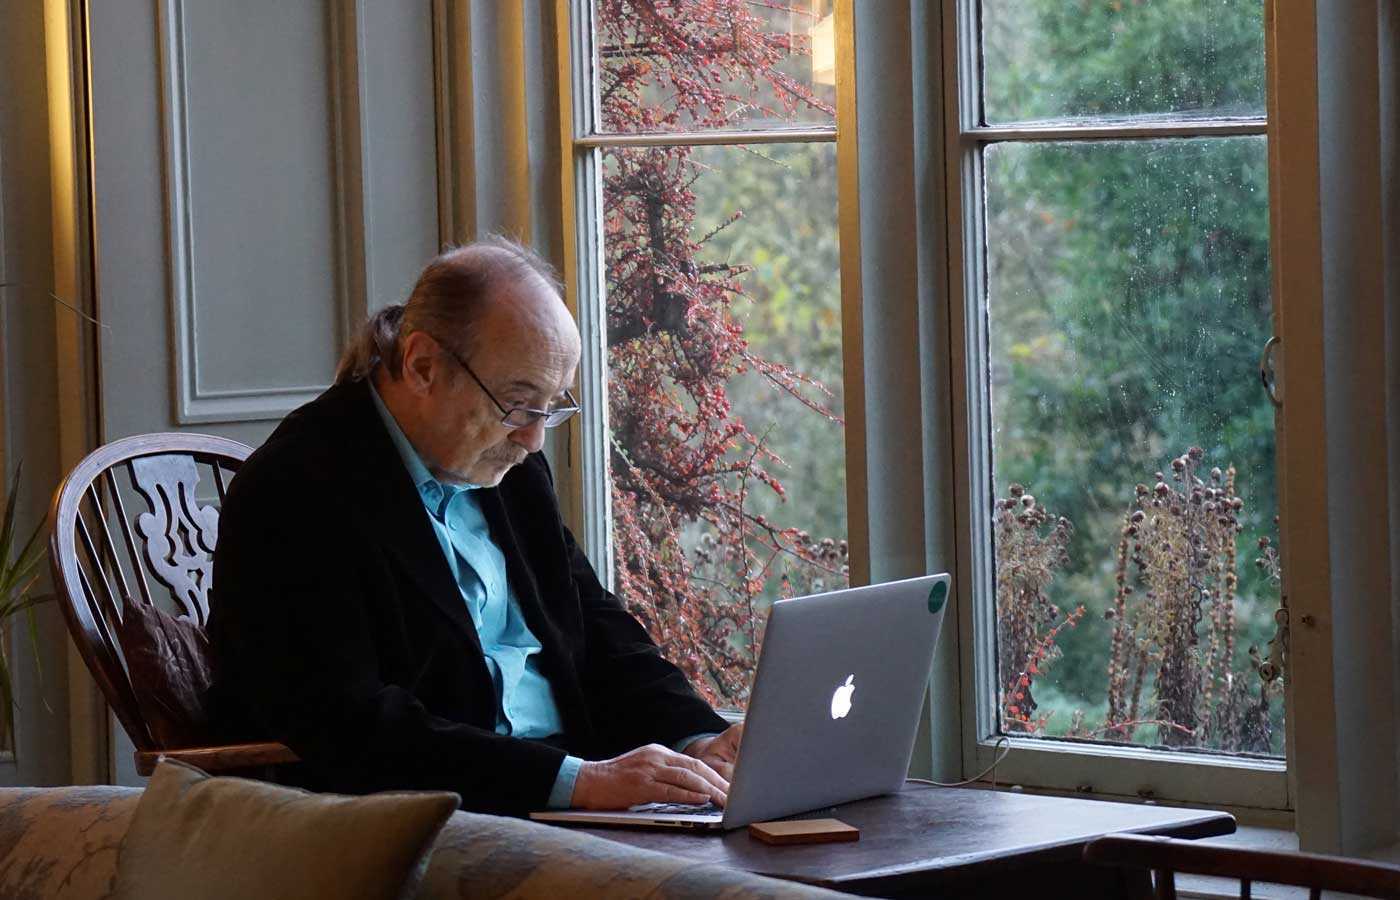 Image of an old man working on a laptop